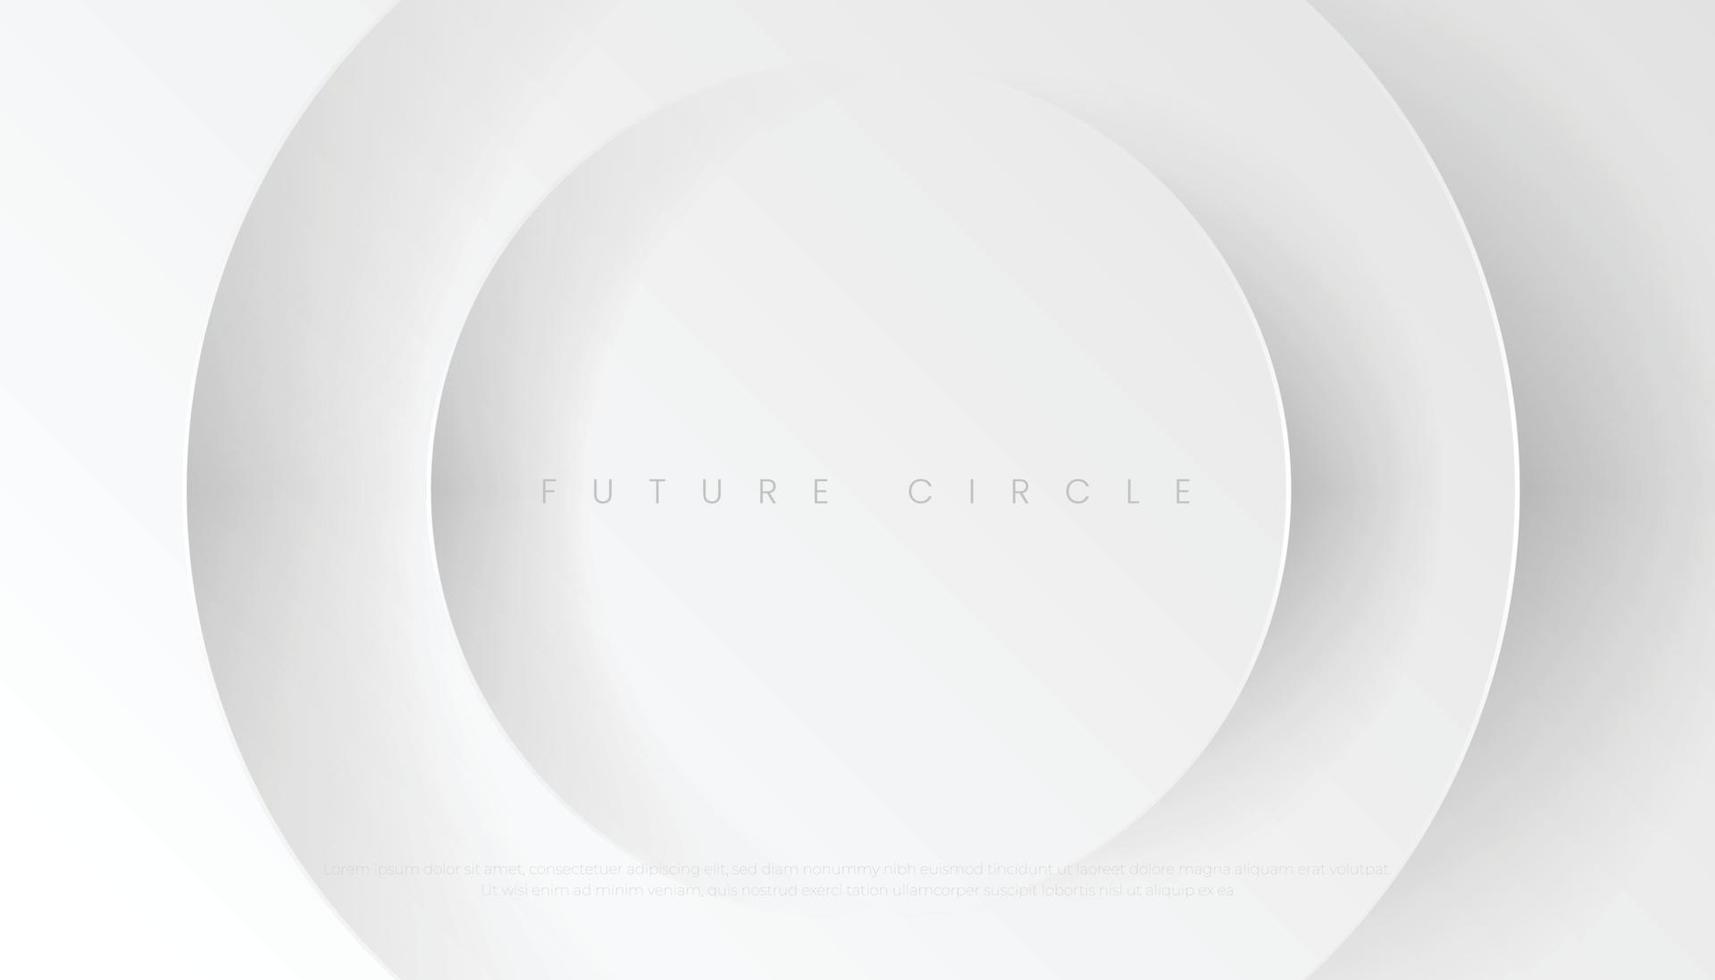 Abstract Minimalist White Circles Background with Luxury Style. Futuristic Circular Wallpaper. Vector Illustration